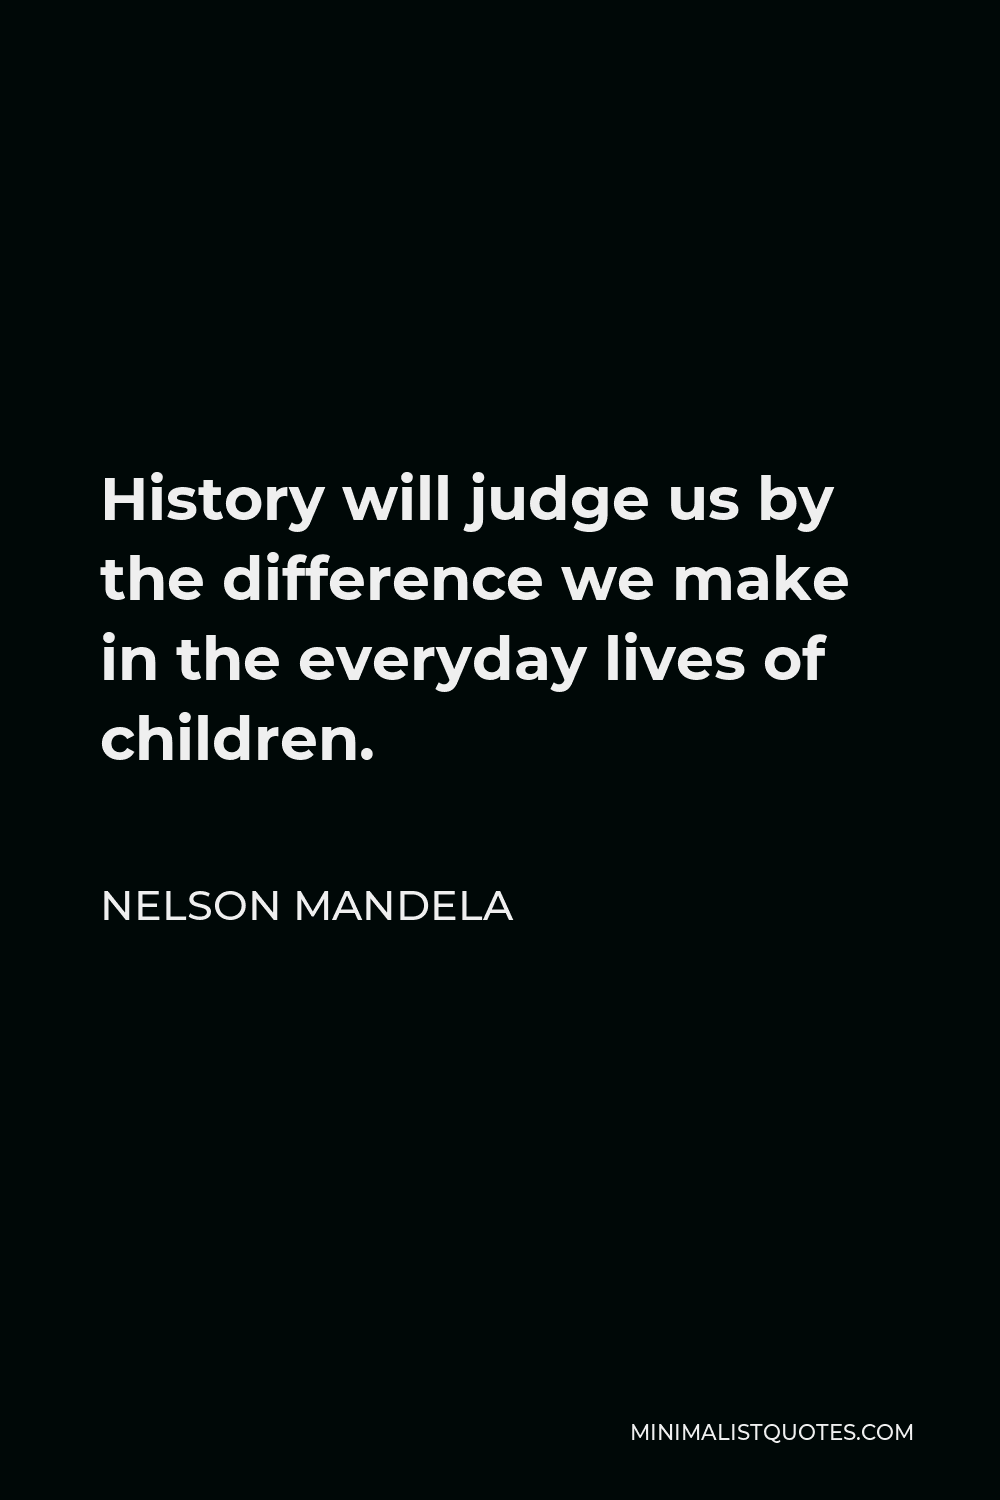 Nelson Mandela Quote - History will judge us by the difference we make in the everyday lives of children.